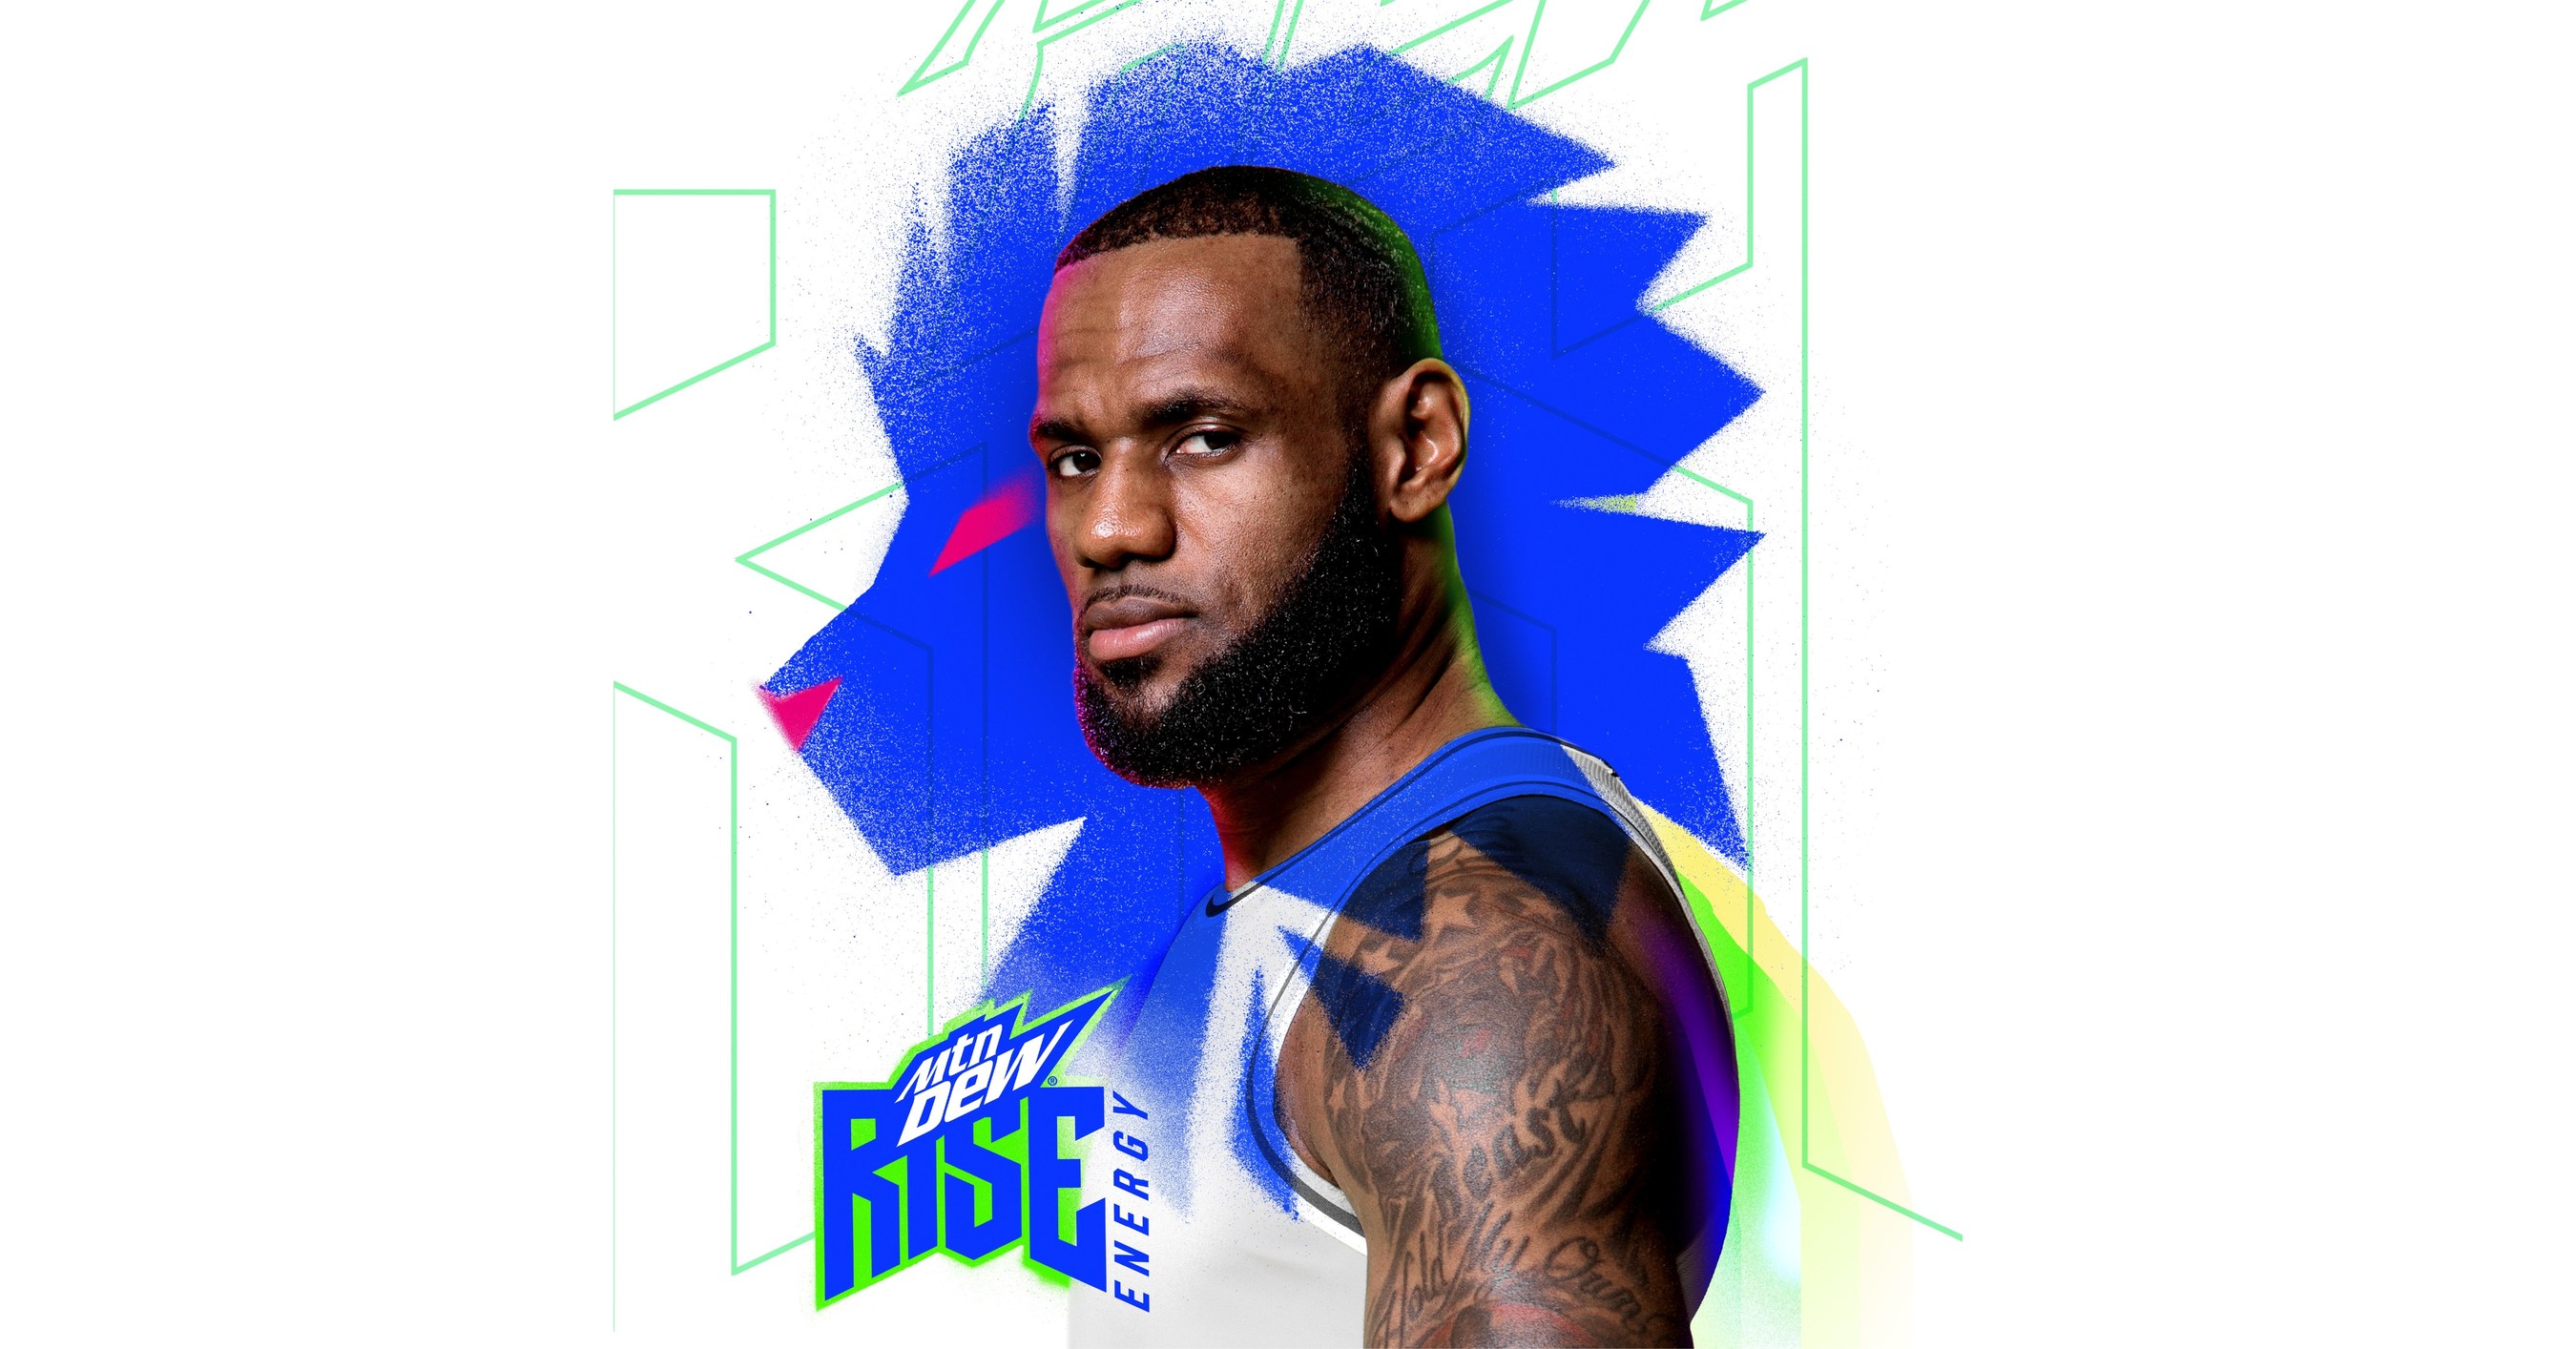 PepsiCo Partners With Global Icon LeBron James To Launch MTN DEW RISE  ENERGY Drink